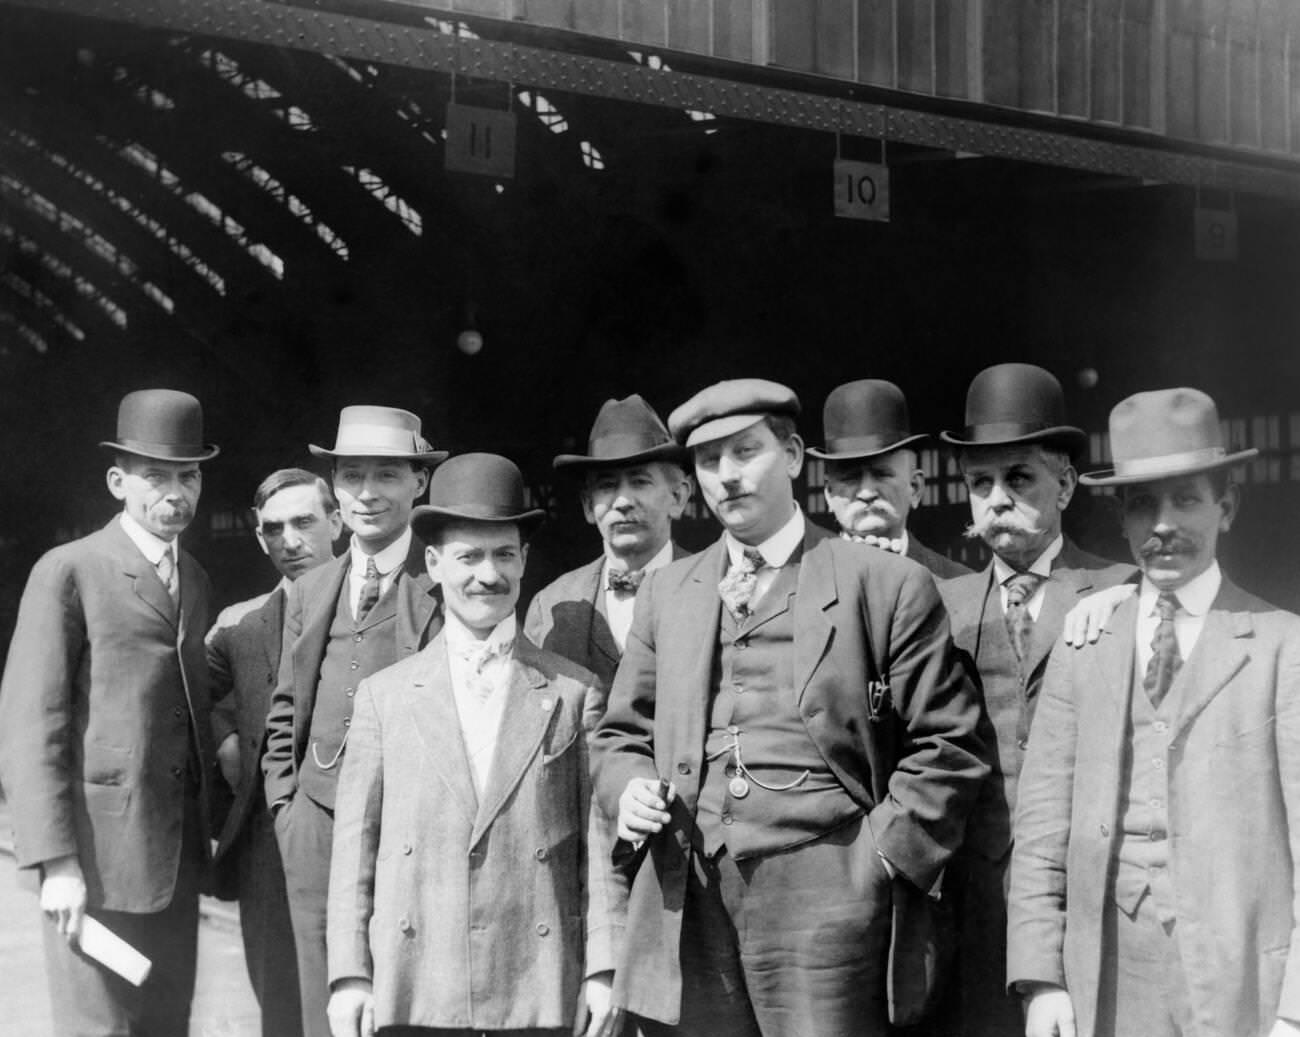 Men in suits and hats at Pennsylvania Railroad Station in Pittsburgh, early 1900s.